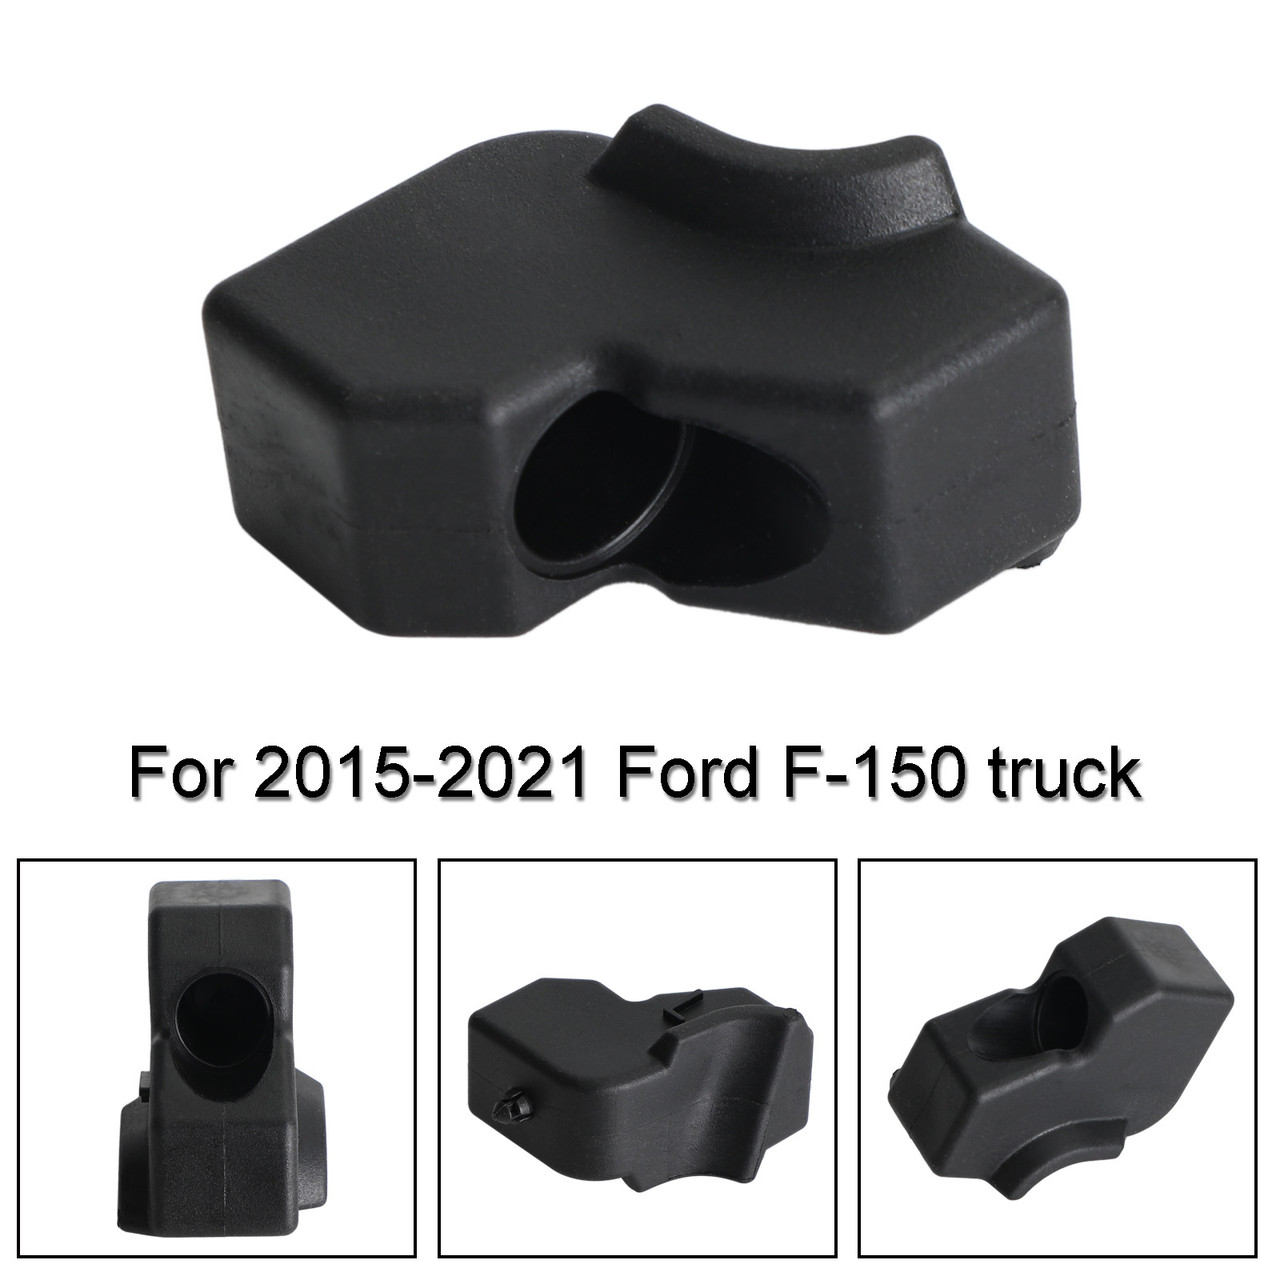 Left Side Tailgate Stop Bumper Rubber Cushion Fit for Ford F-150 truck 2015-2021 Black